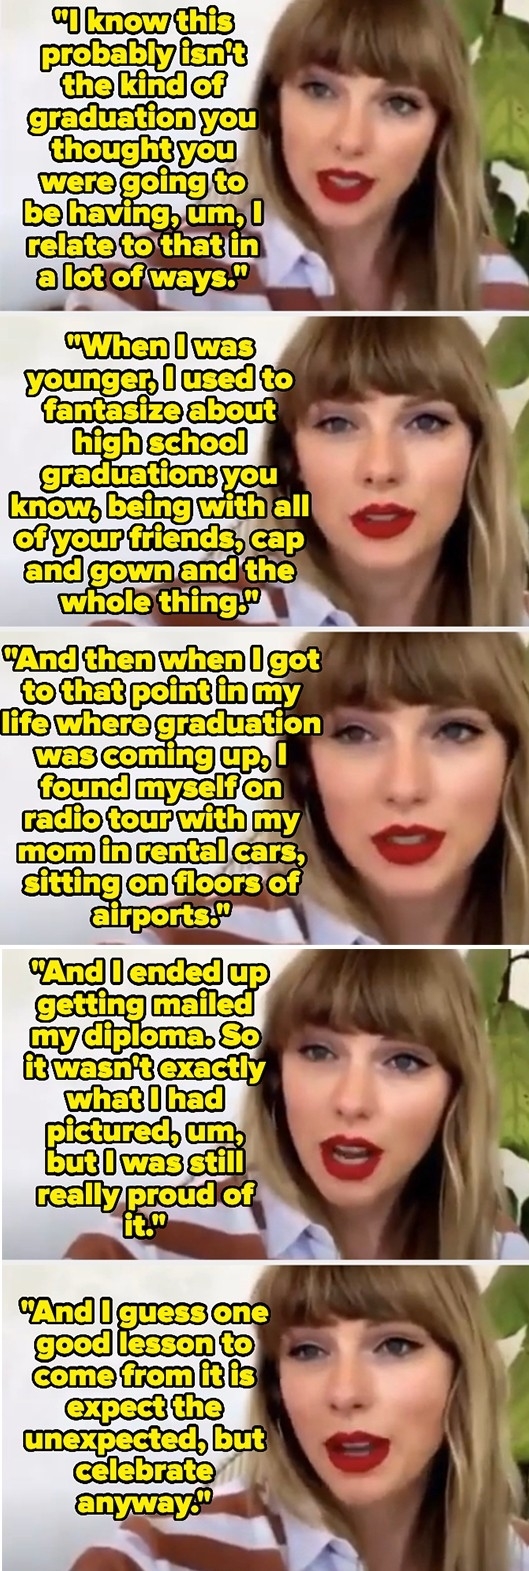 Taylor Swift speaking about her high school graduation experience, key plans, and subsequent music career transformation